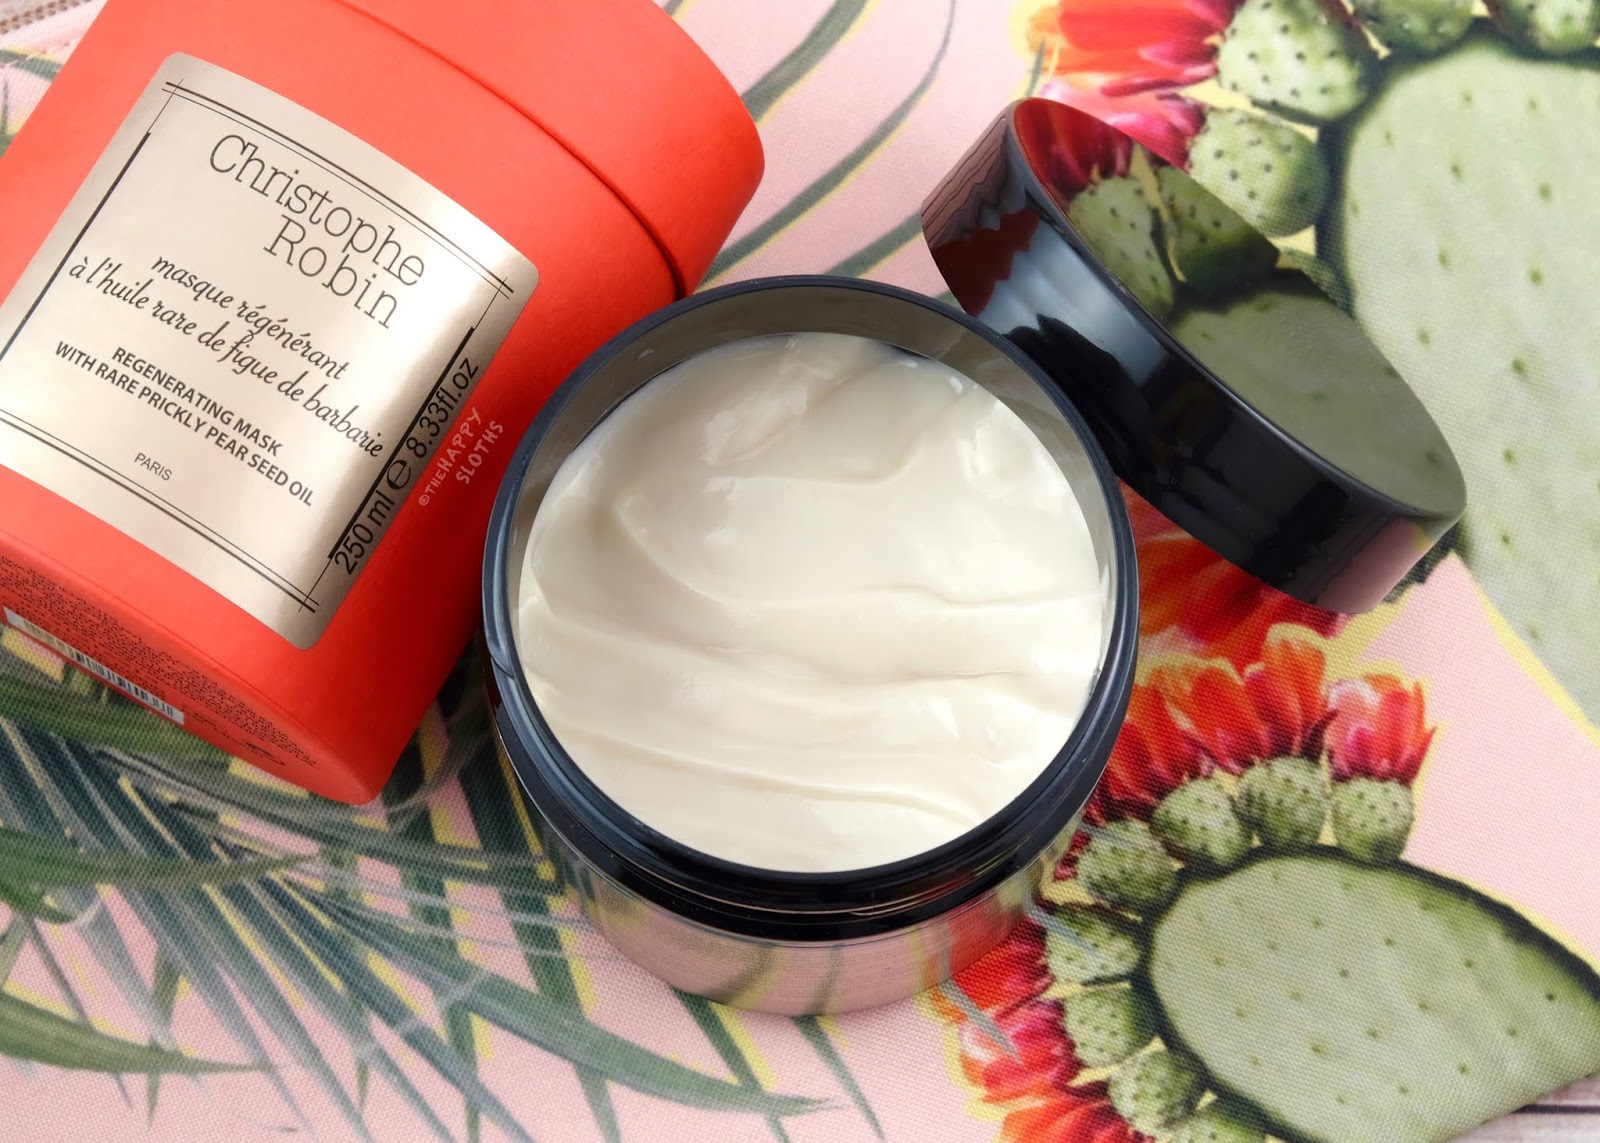 Christophe Robin | Regenerating Hair Mask with Prickly Pear Seed Oil,  Regenerating Hair Serum & Multipurpose Regenerating Balm: Review | The  Happy Sloths: Beauty, Makeup, and Skincare Blog with Reviews and Swatches